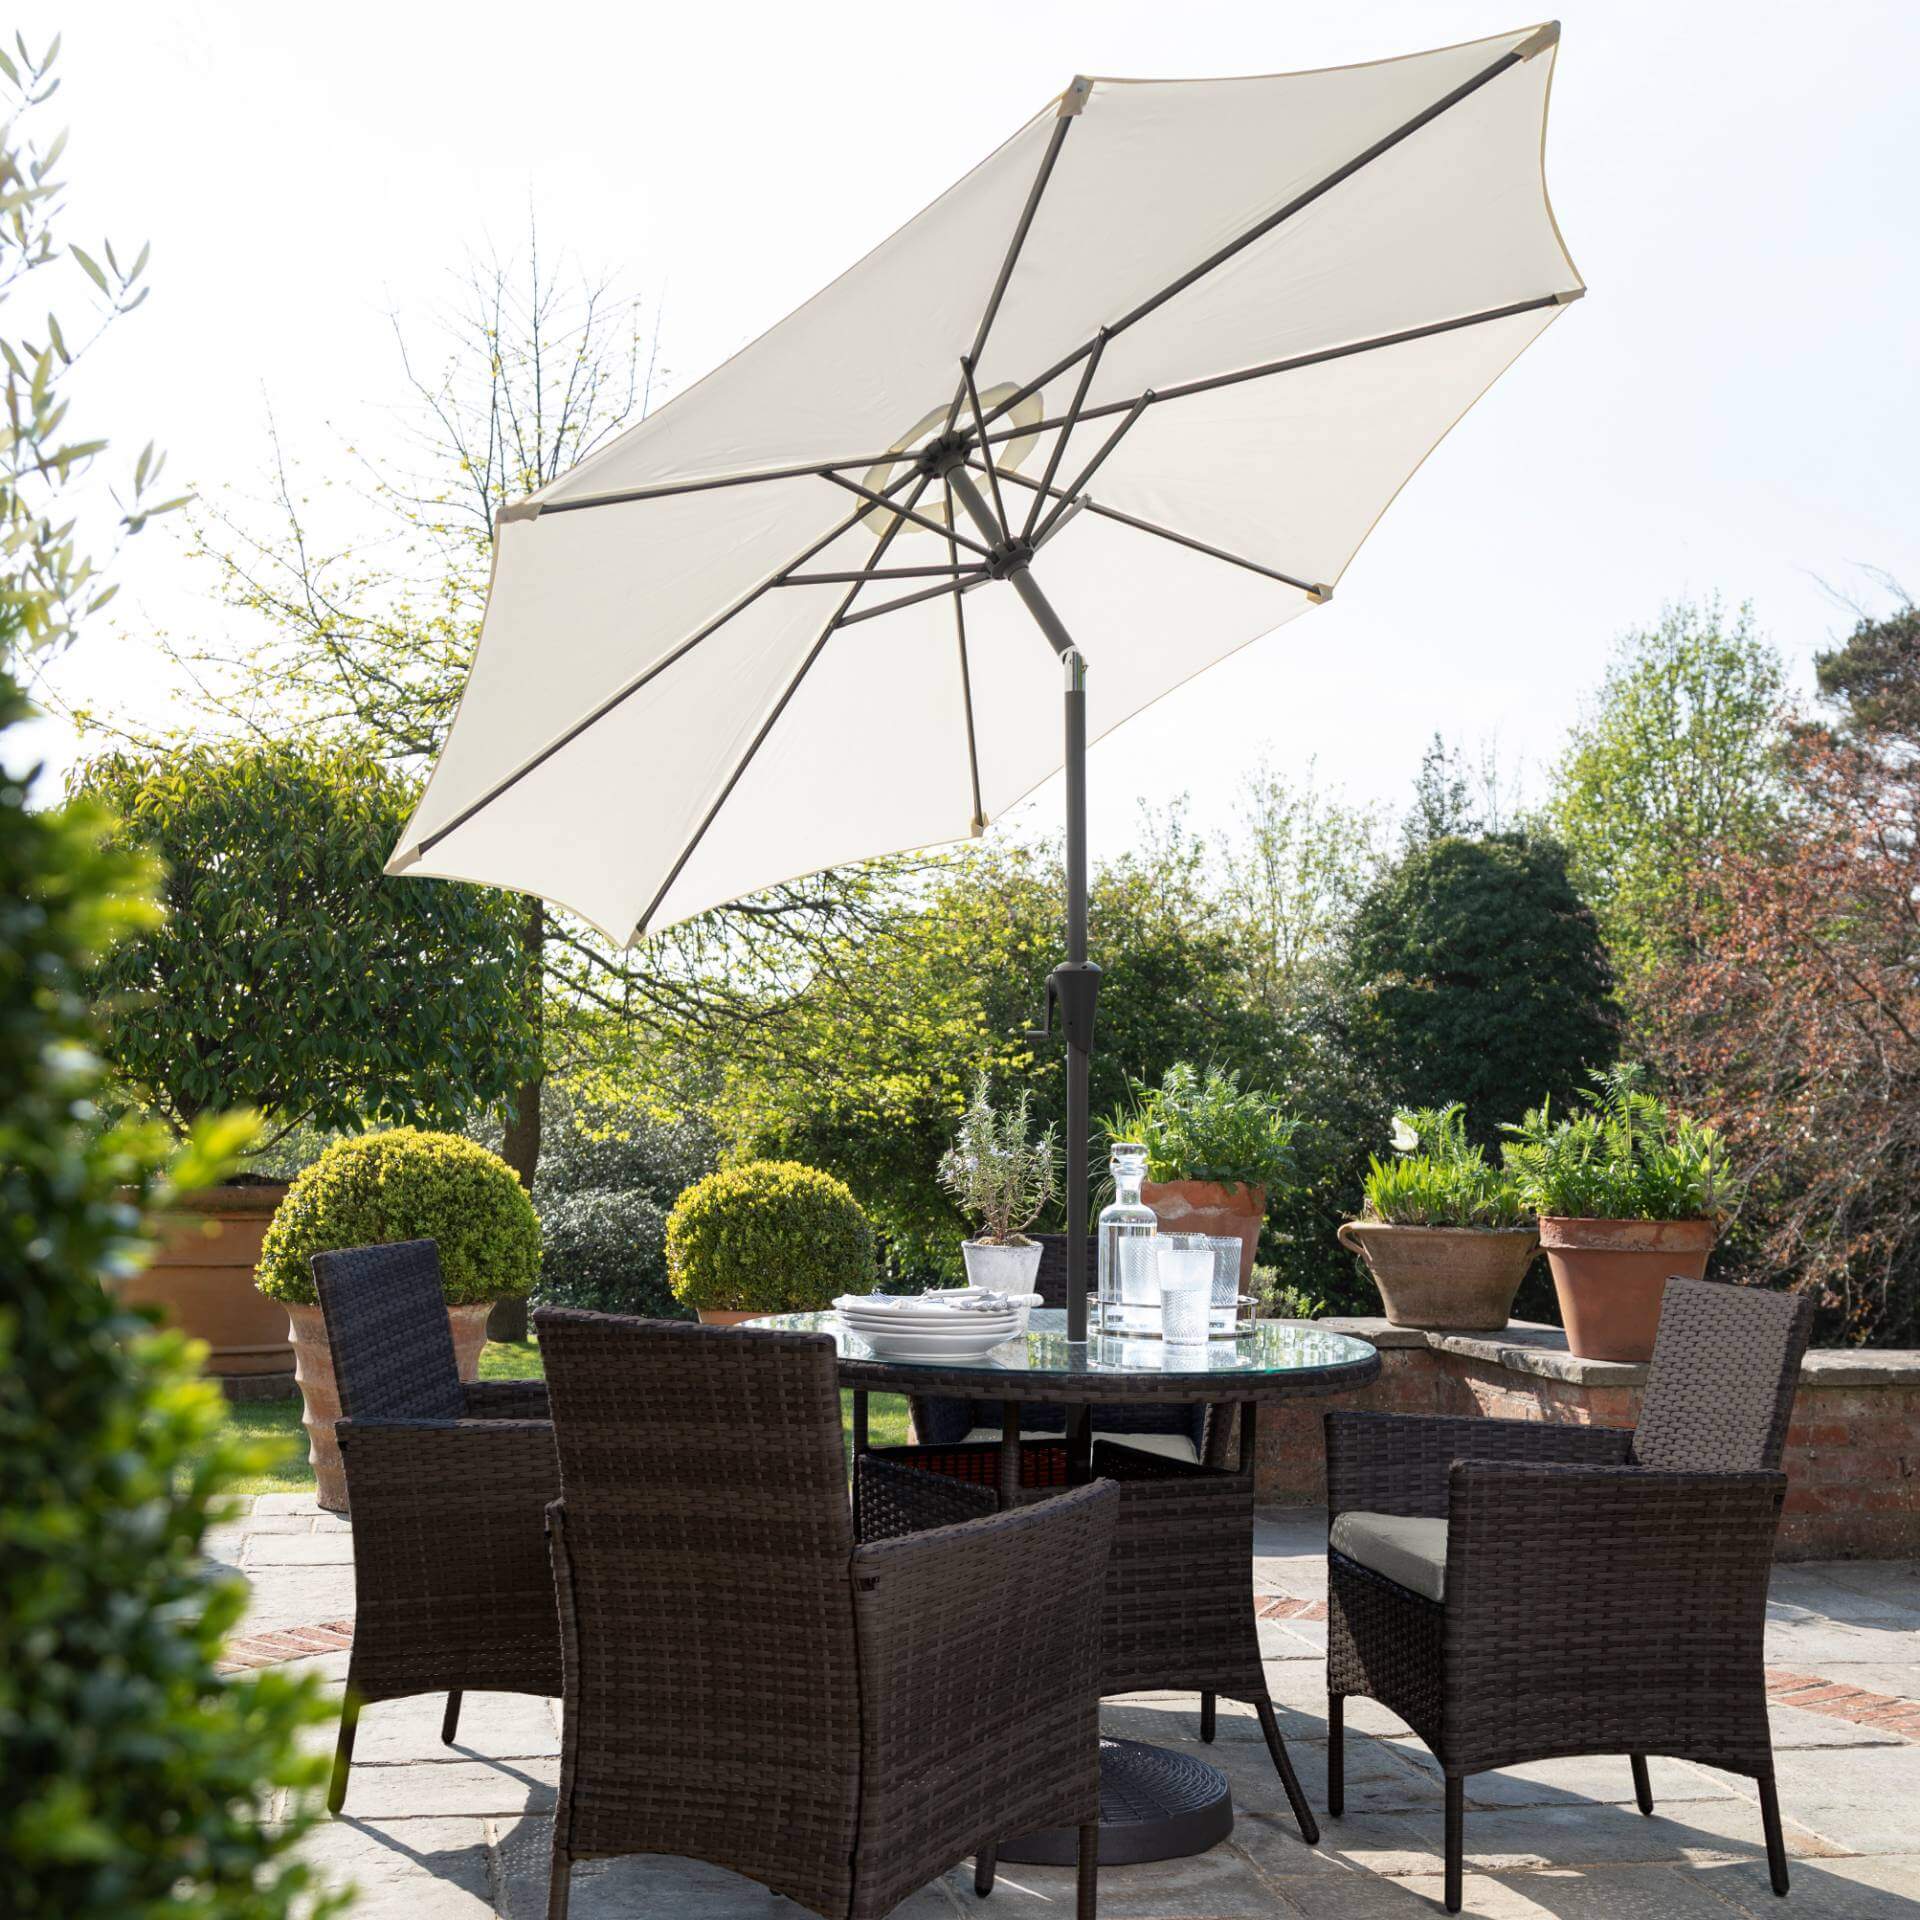 Kemble 4 Seater Rattan Round Dining Set with LED Premium Parasol with Parasol Rain Cover - Brown